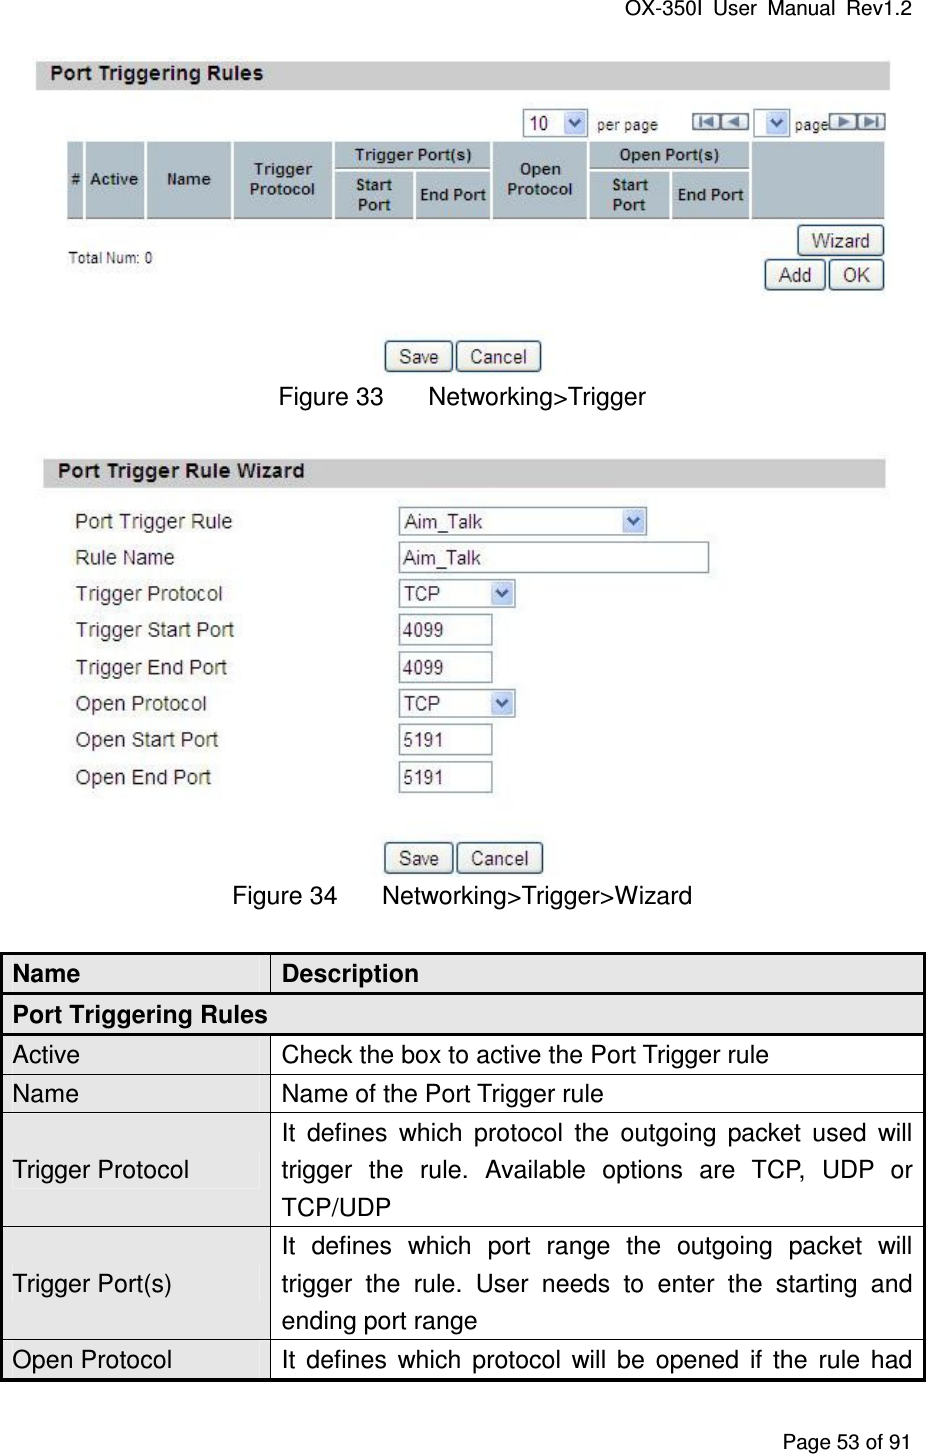 OX-350I  User  Manual  Rev1.2 Page 53 of 91  Figure 33  Networking&gt;Trigger  Figure 34  Networking&gt;Trigger&gt;Wizard Name  Description Port Triggering Rules Active  Check the box to active the Port Trigger rule Name  Name of the Port Trigger rule Trigger Protocol It  defines  which  protocol  the  outgoing  packet  used  will trigger  the  rule.  Available  options  are  TCP,  UDP  or TCP/UDP Trigger Port(s) It  defines  which  port  range  the  outgoing  packet  will trigger  the  rule.  User  needs  to  enter  the  starting  and ending port range Open Protocol  It  defines  which  protocol  will  be  opened  if  the  rule  had 